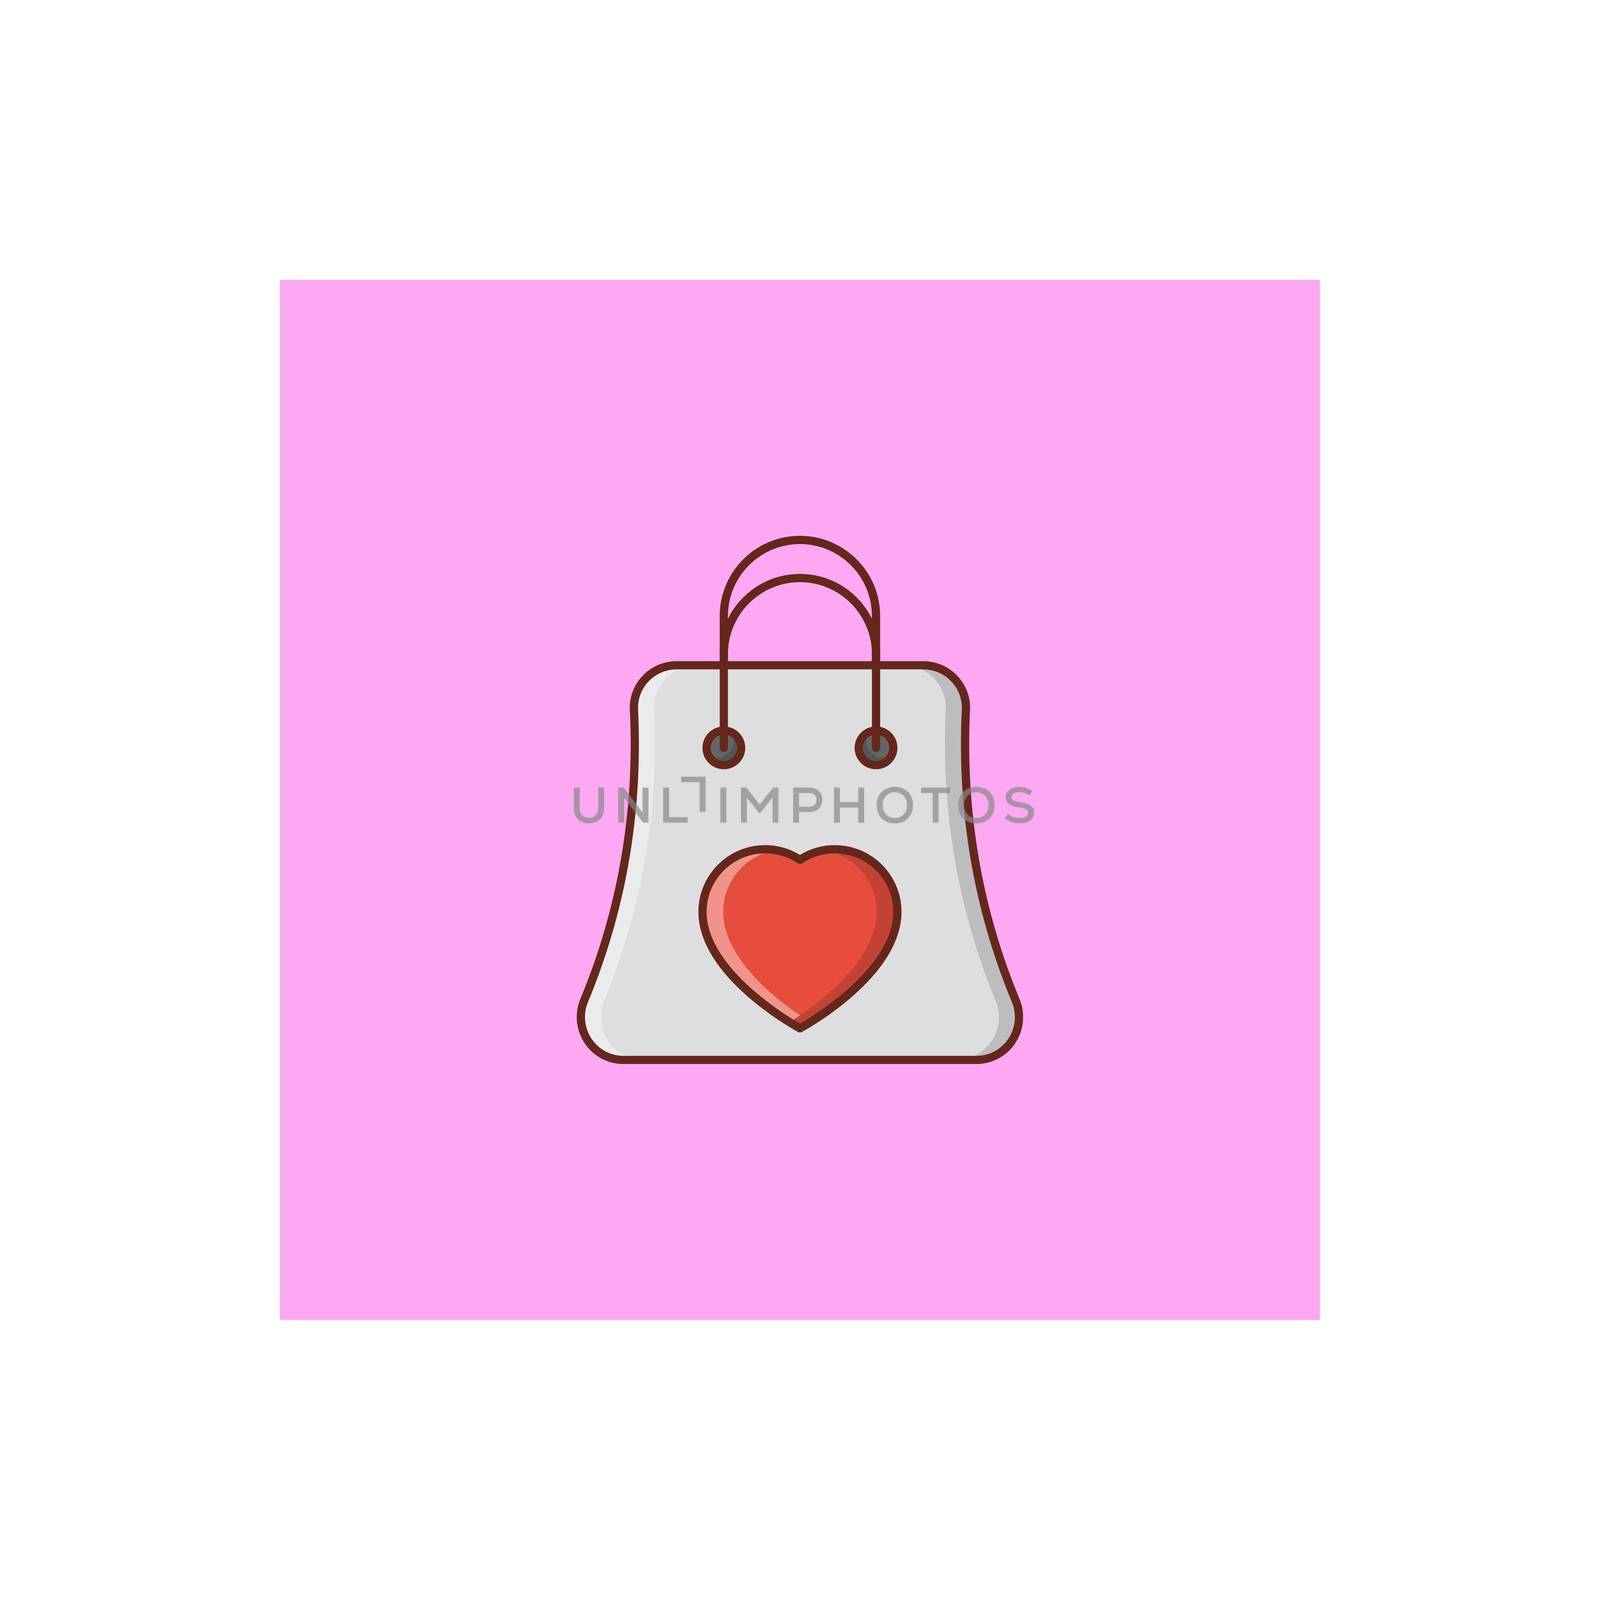 bag Vector illustration on a transparent background. Premium quality symbols.Vector line flat color icon for concept and graphic design.